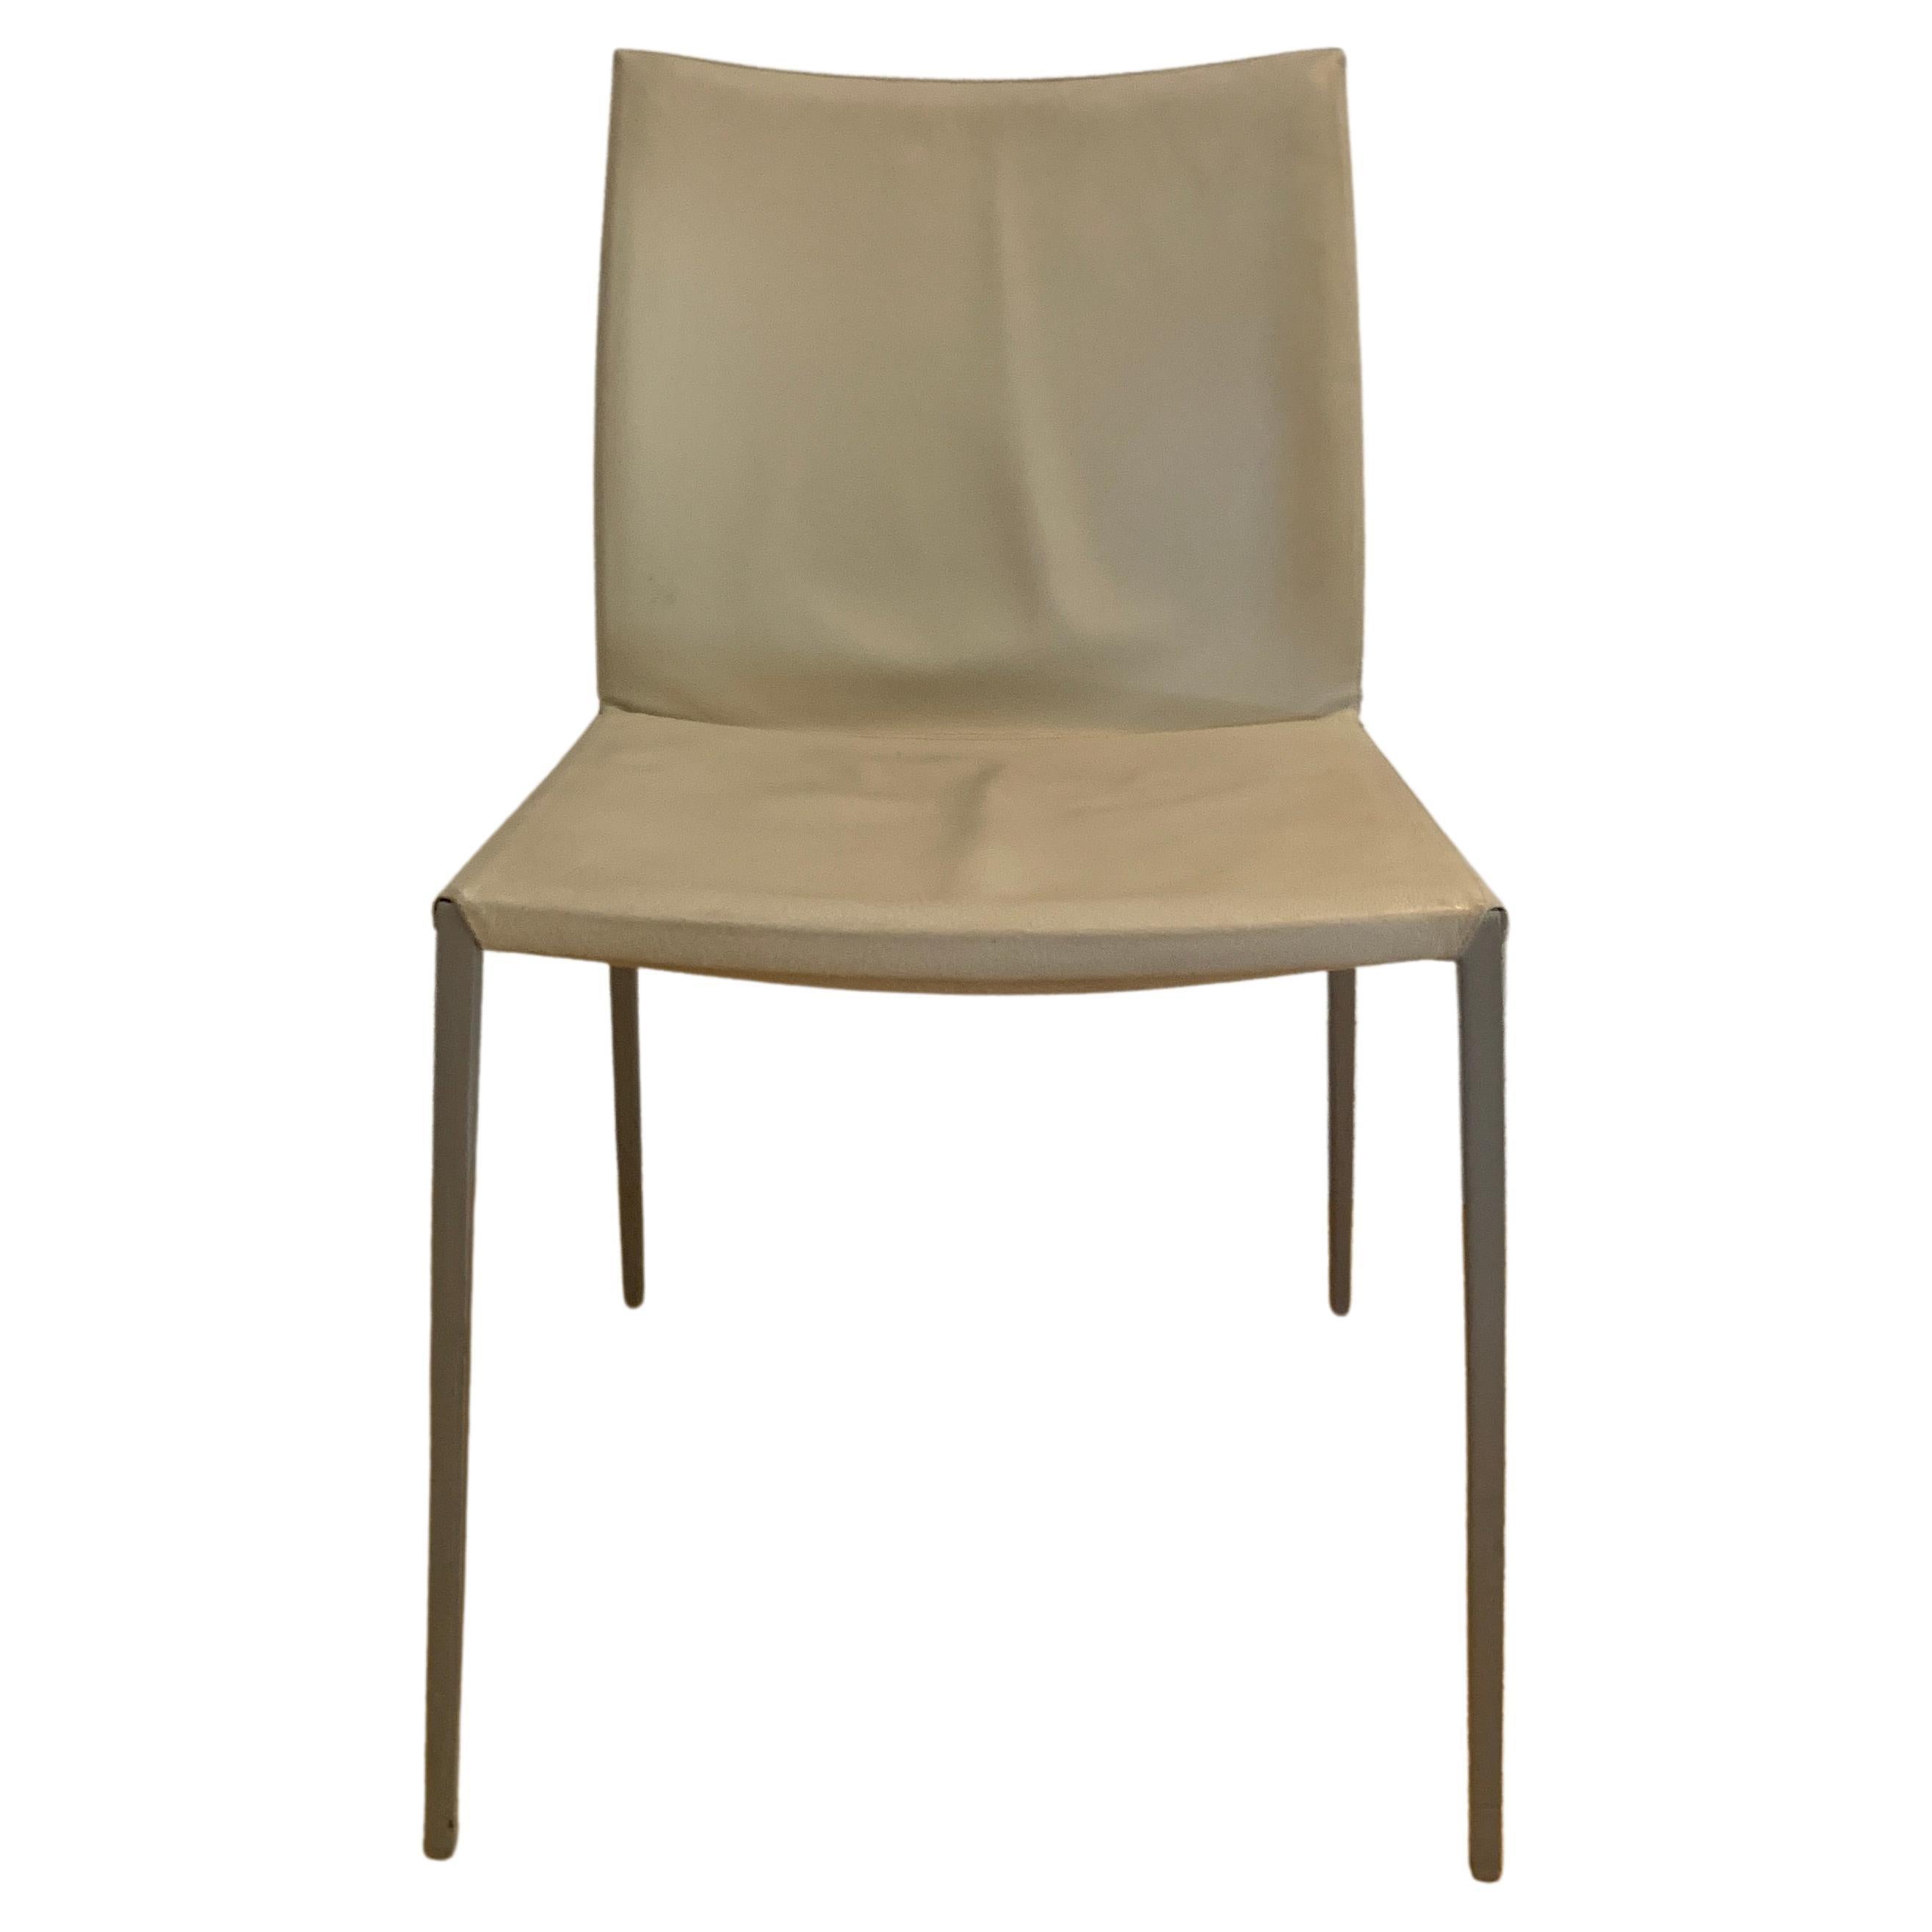 Lia leather dining chair by Roberto Barbieri for Zanotta.
Made in Italy.
In stock in Los Angeles.

Condition: Fiar (please refer to the product images to view the condition of the chairs).
 